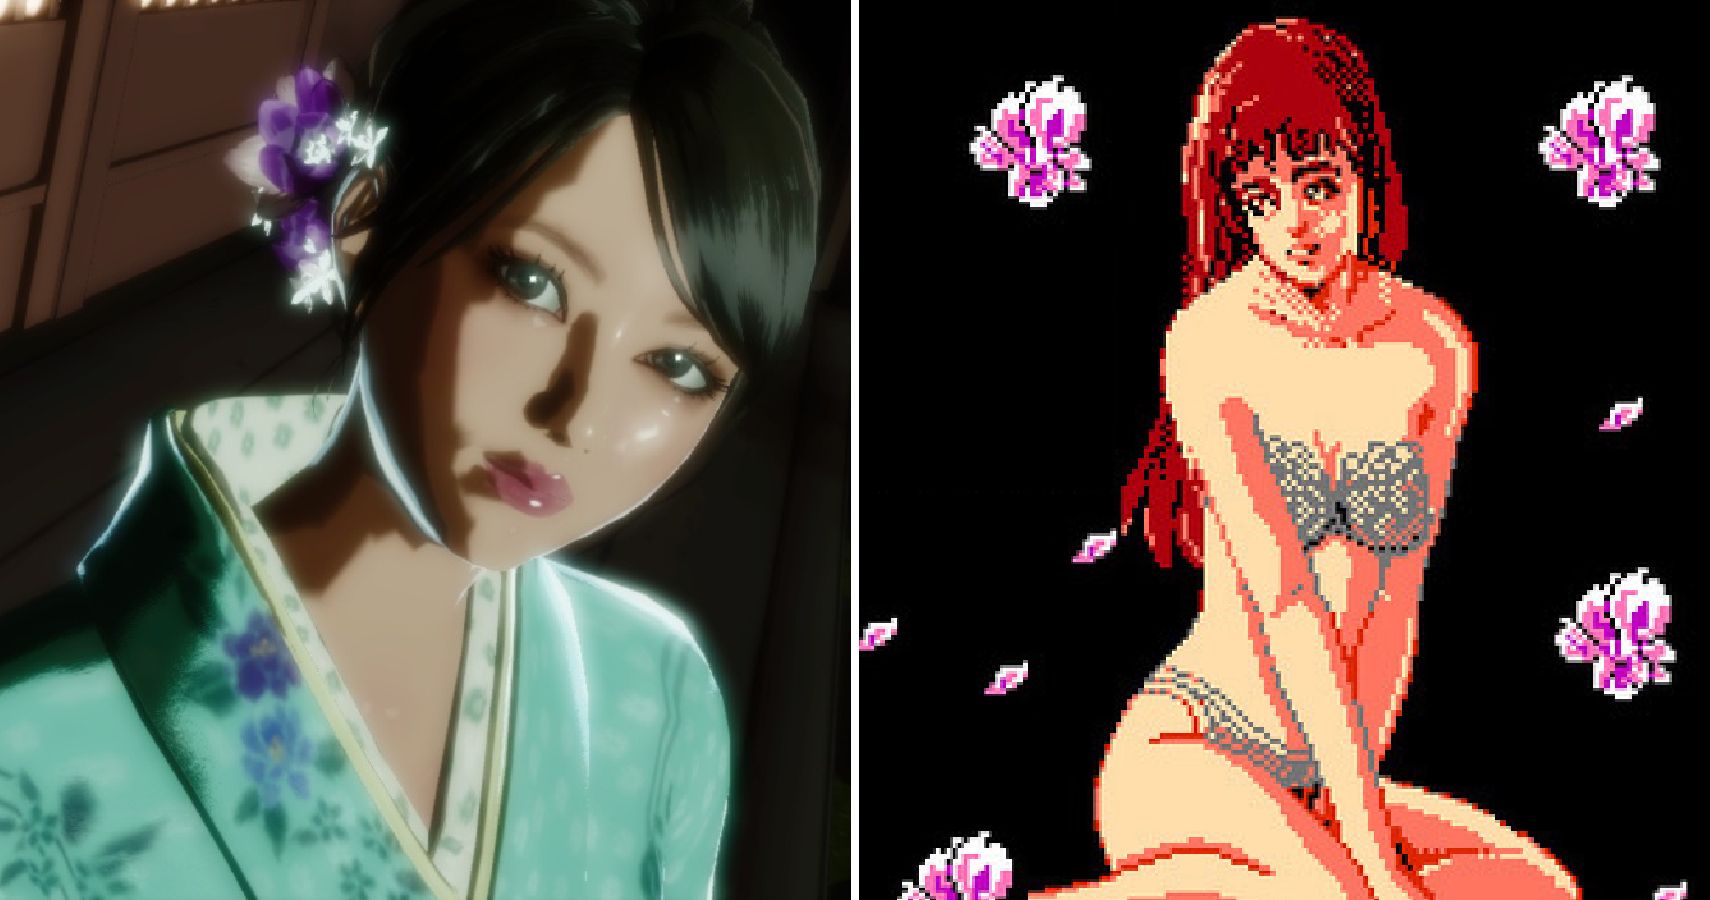 15 Most Perverted Games You Don't Want to Get Caught Playing